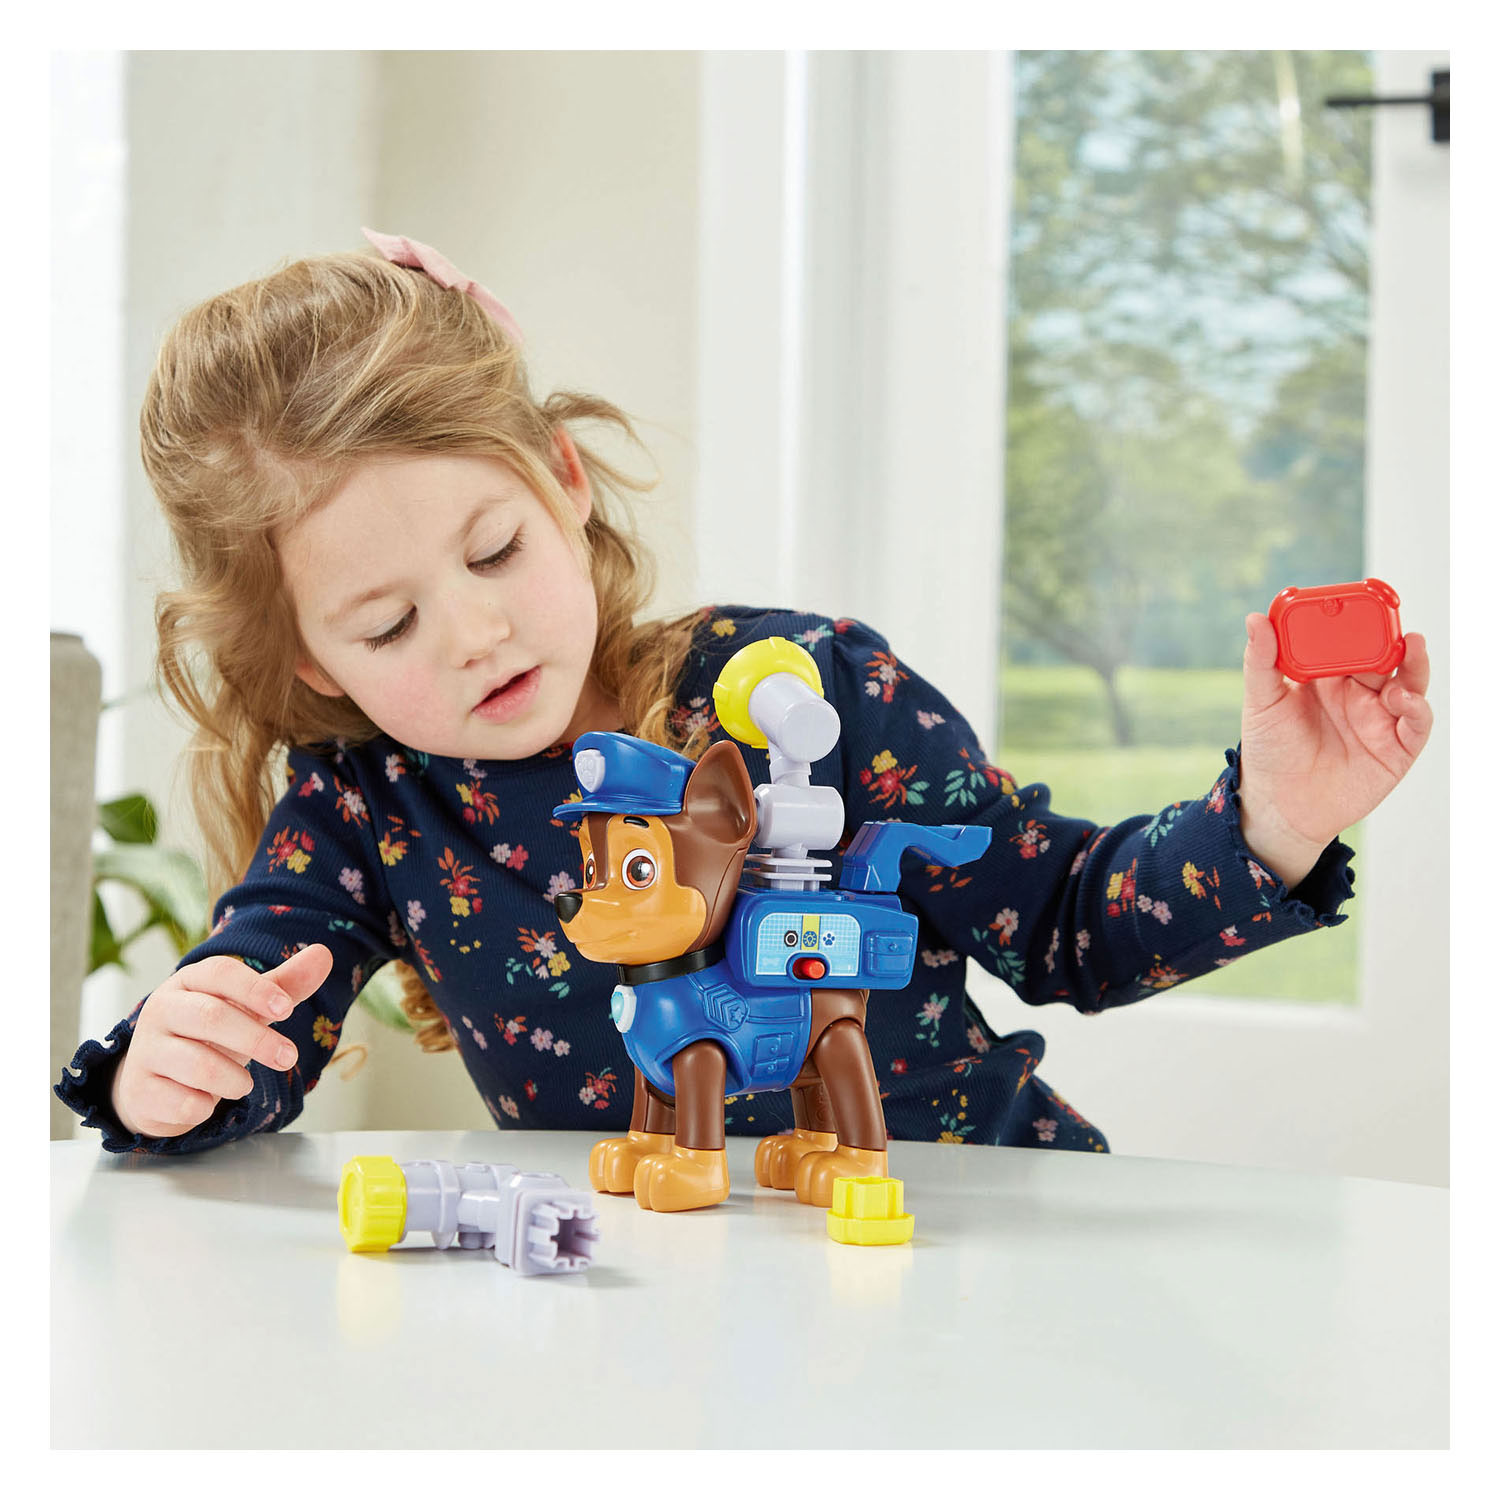 VTech PAW Patrol  - Smartpup Chase Interactief